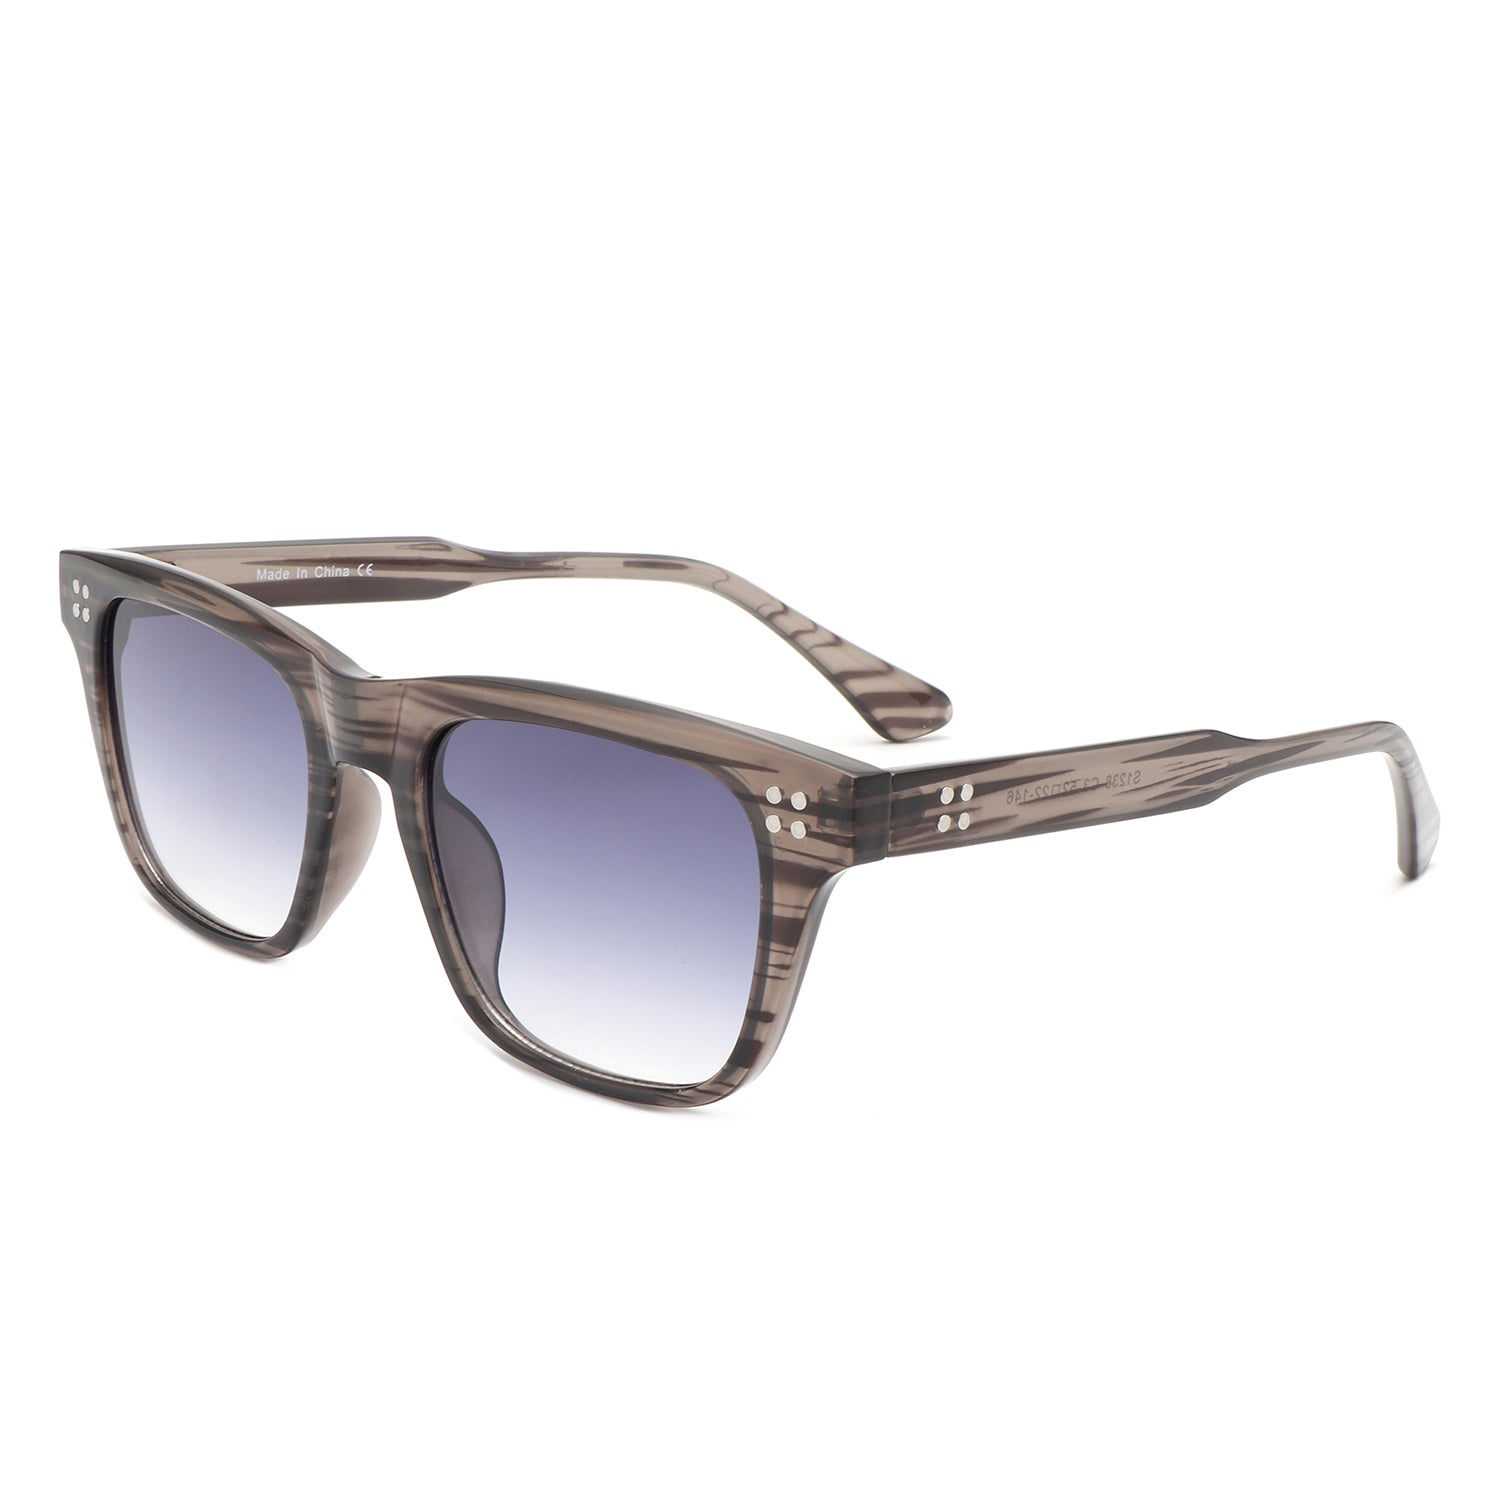 S1238 - Square Classic Horn Rimmed Tinted Flat Top Wholesale Sunglasses